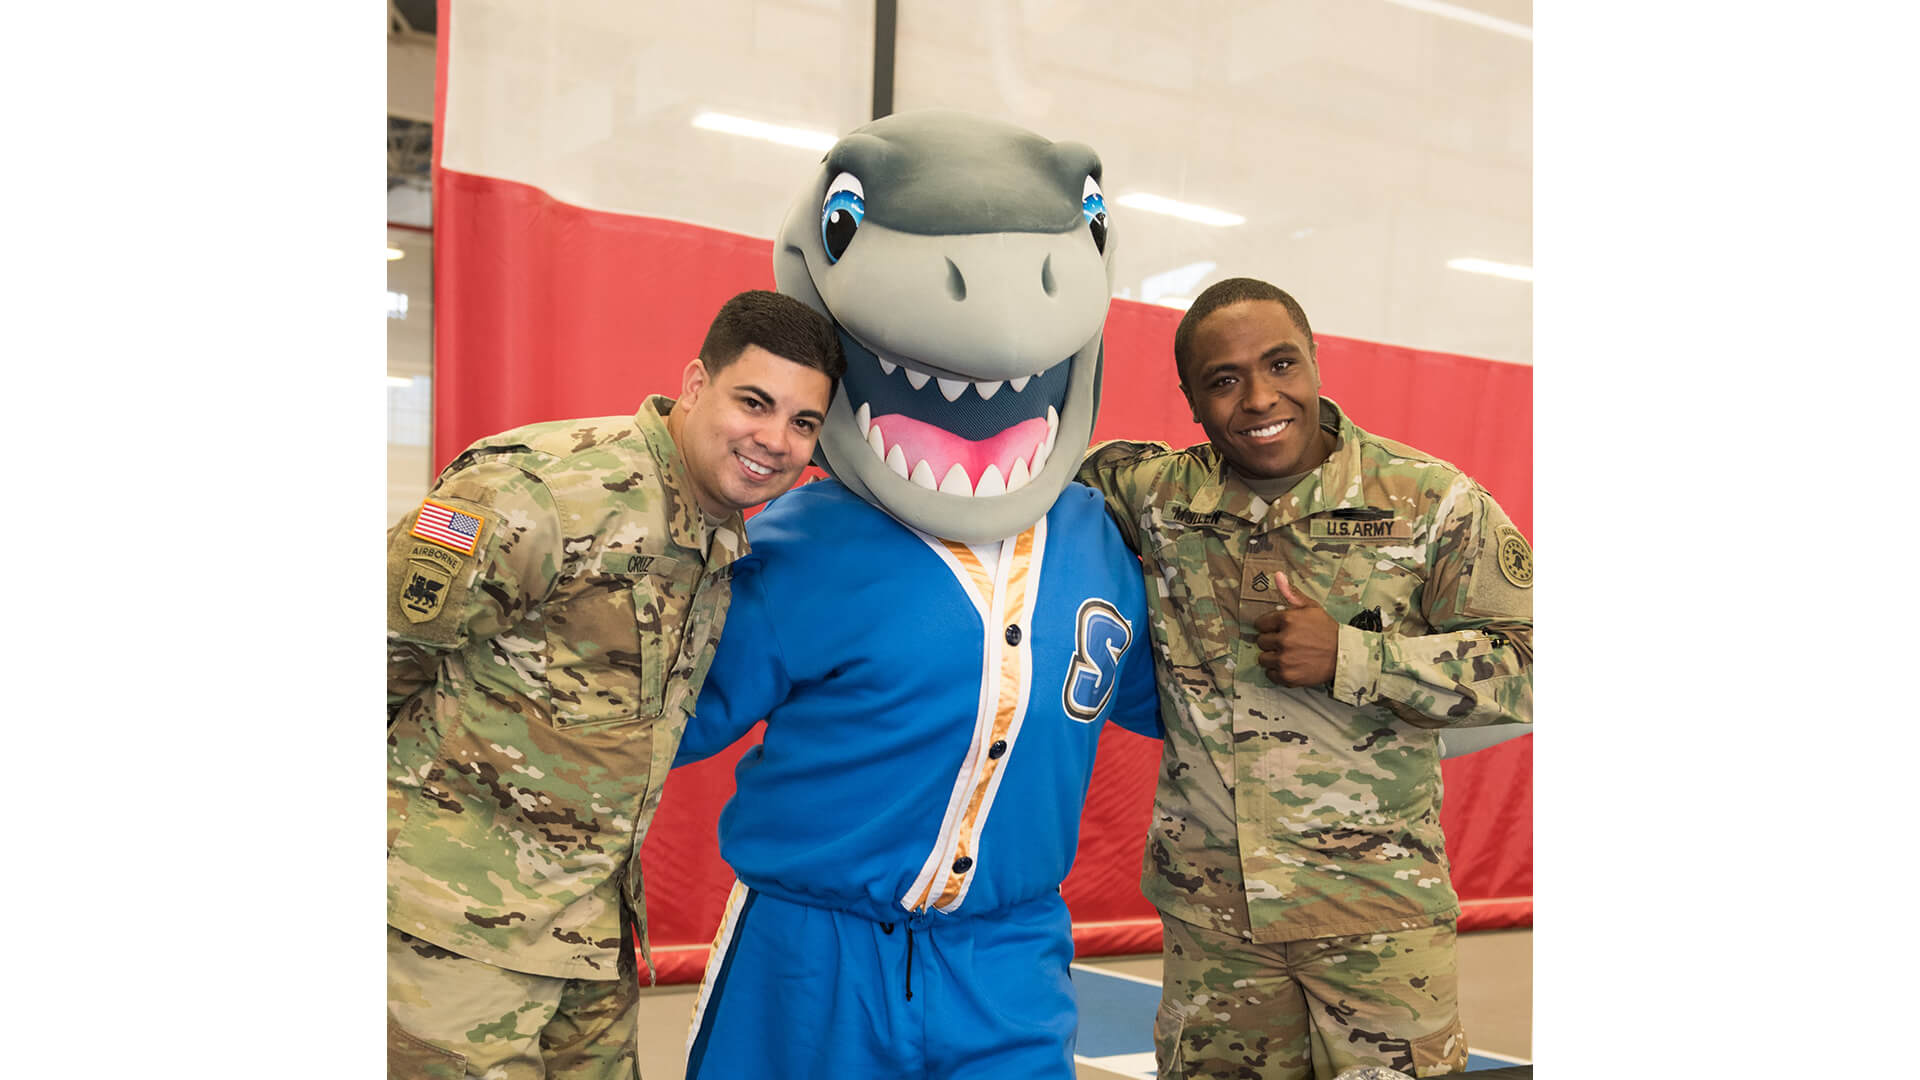 Photo of two active veterans and Finn the shark.